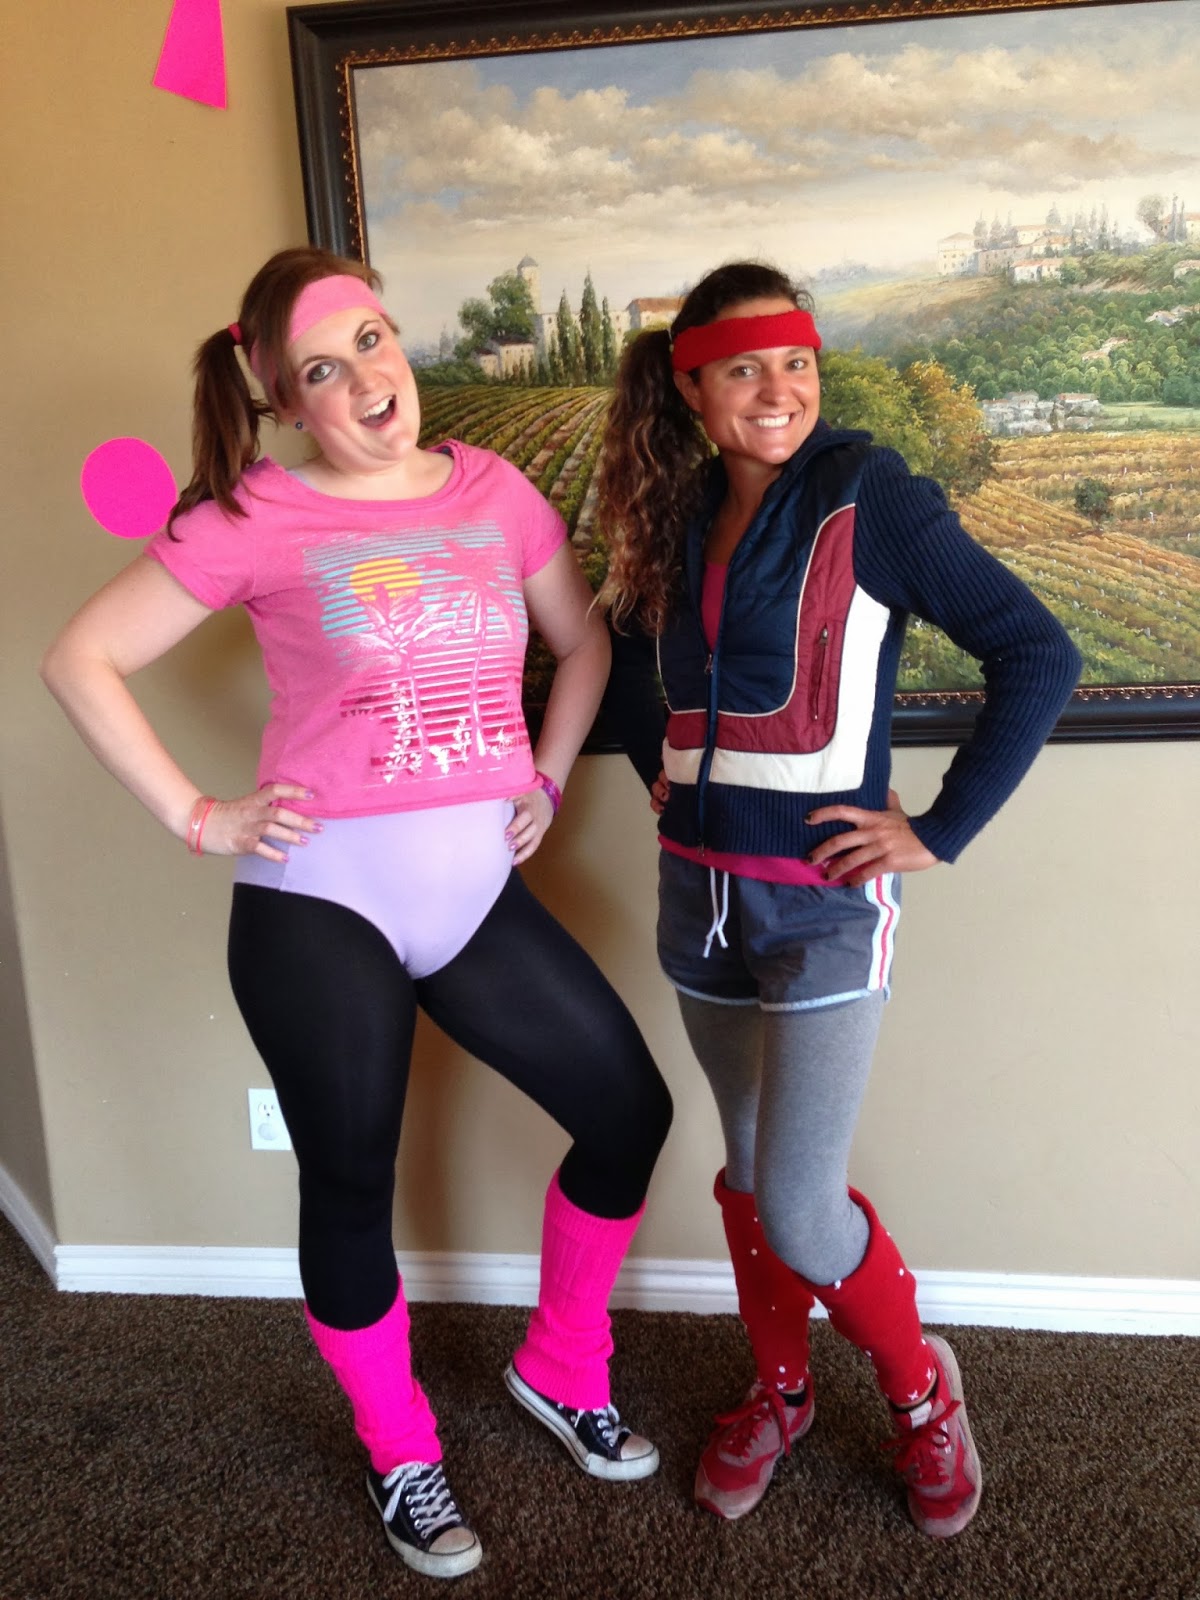 Just the 4 of us: 80's Workout Party